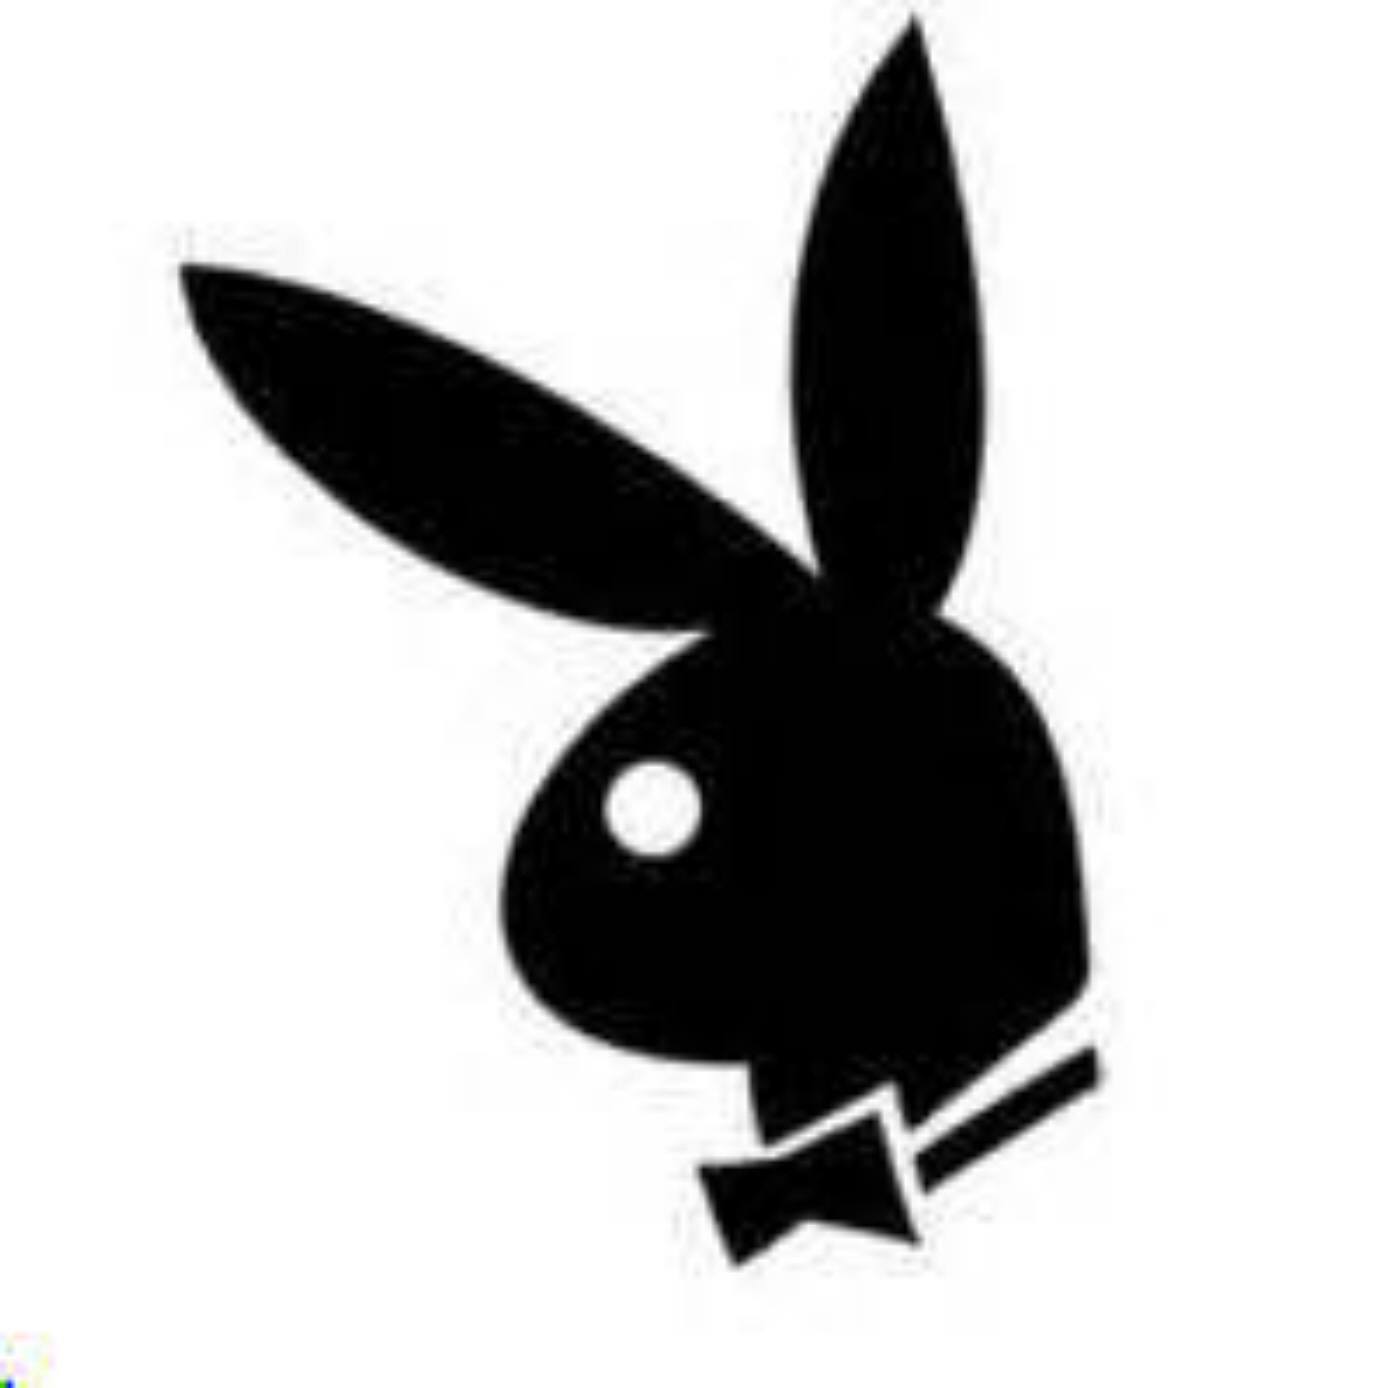 Download Today Live Sports: 21 playboy bunny 1 silhouette drawing ...